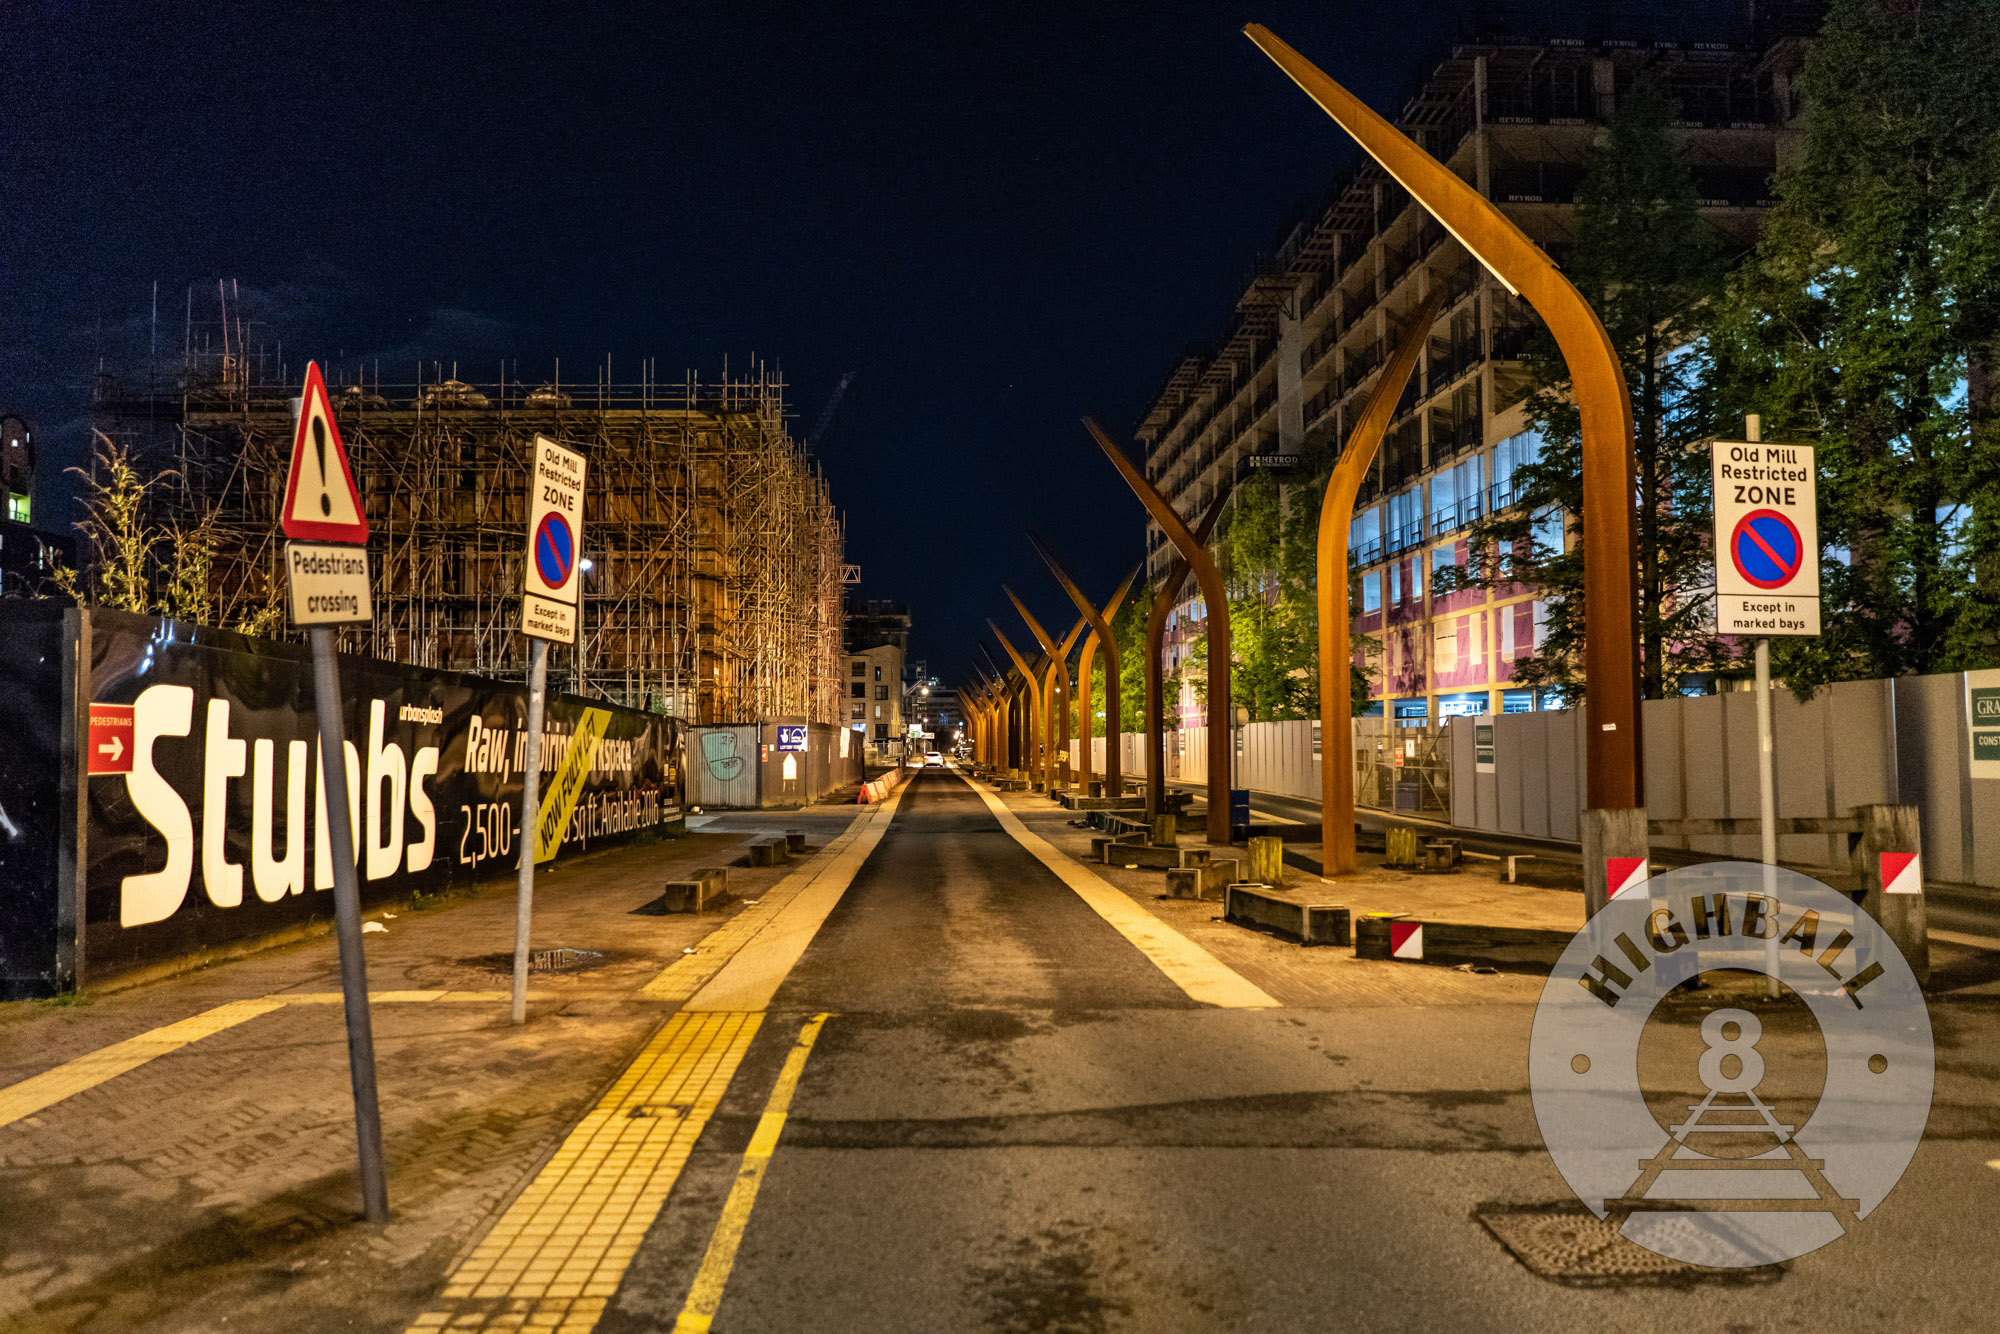 Night photo of Old Mill Street from in front of the Ancoats Dispensary, Ancoats, Manchester, UK, 2018.